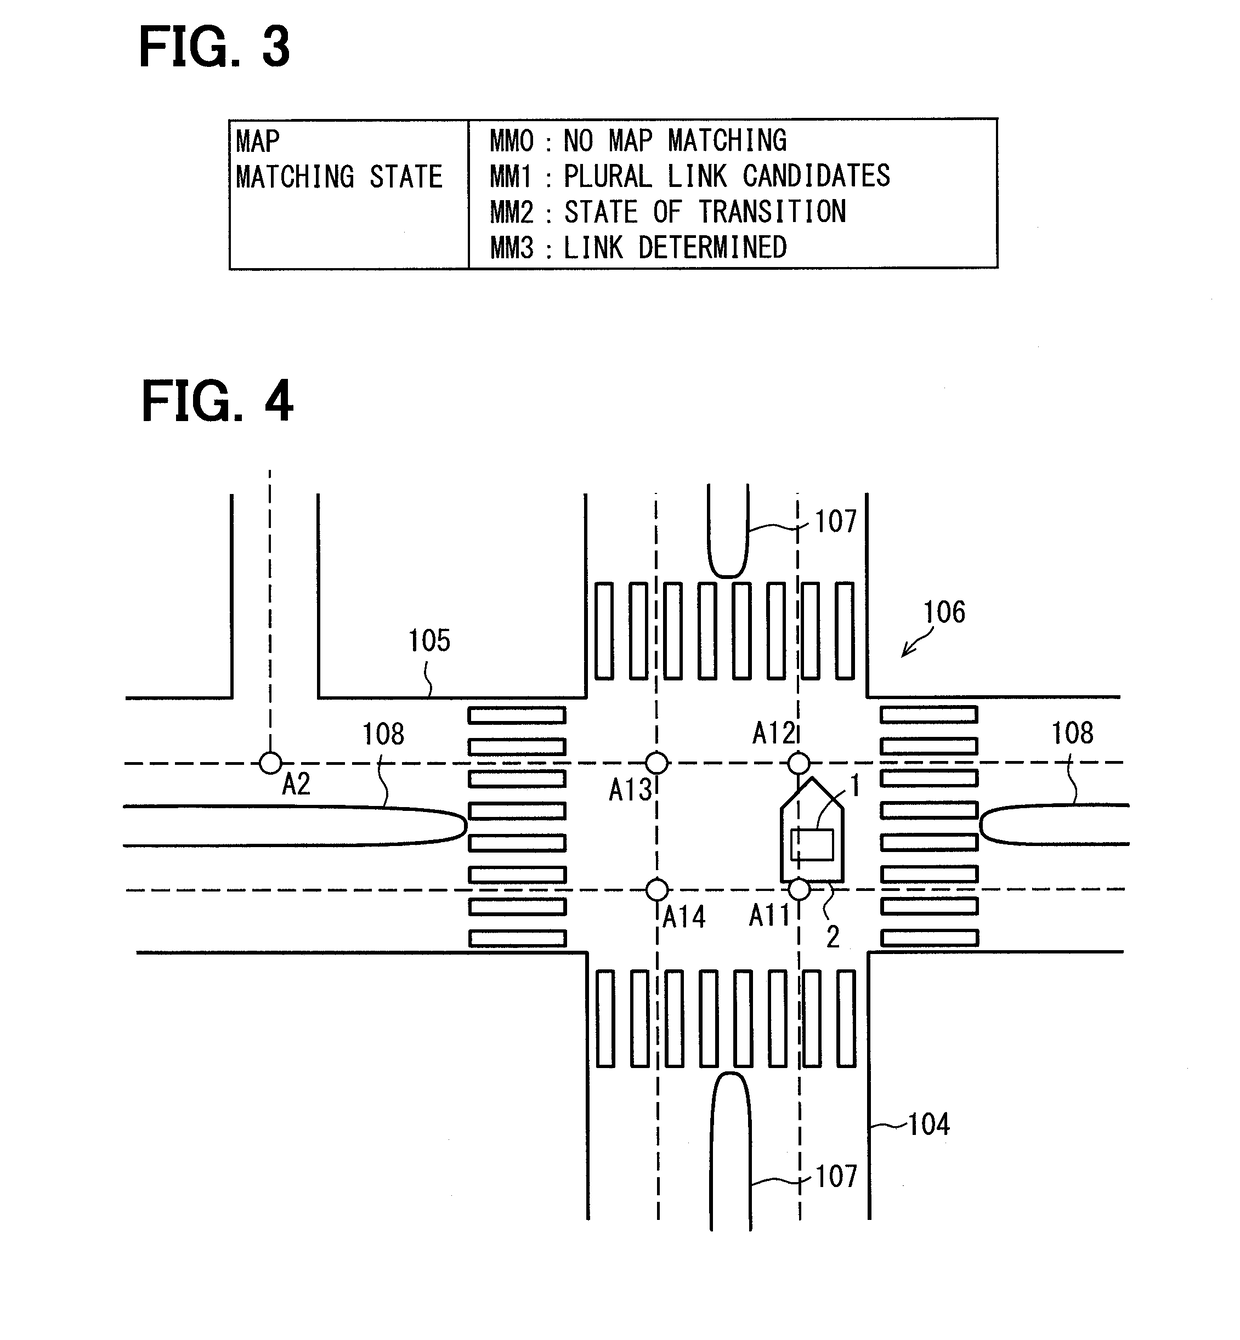 Drive support apparatus